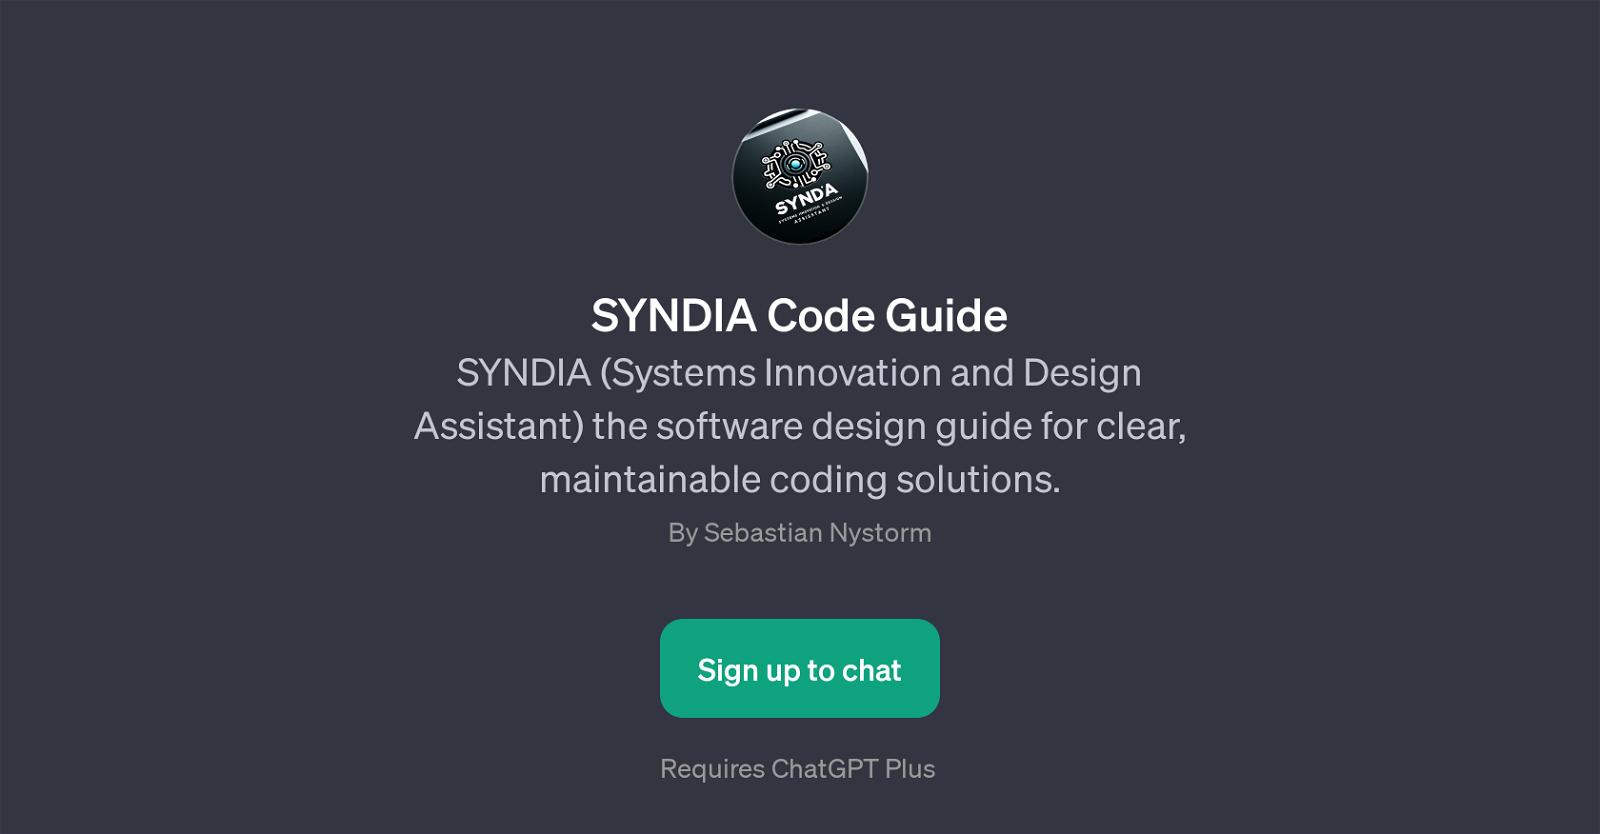 SYNDIA Code Guide website